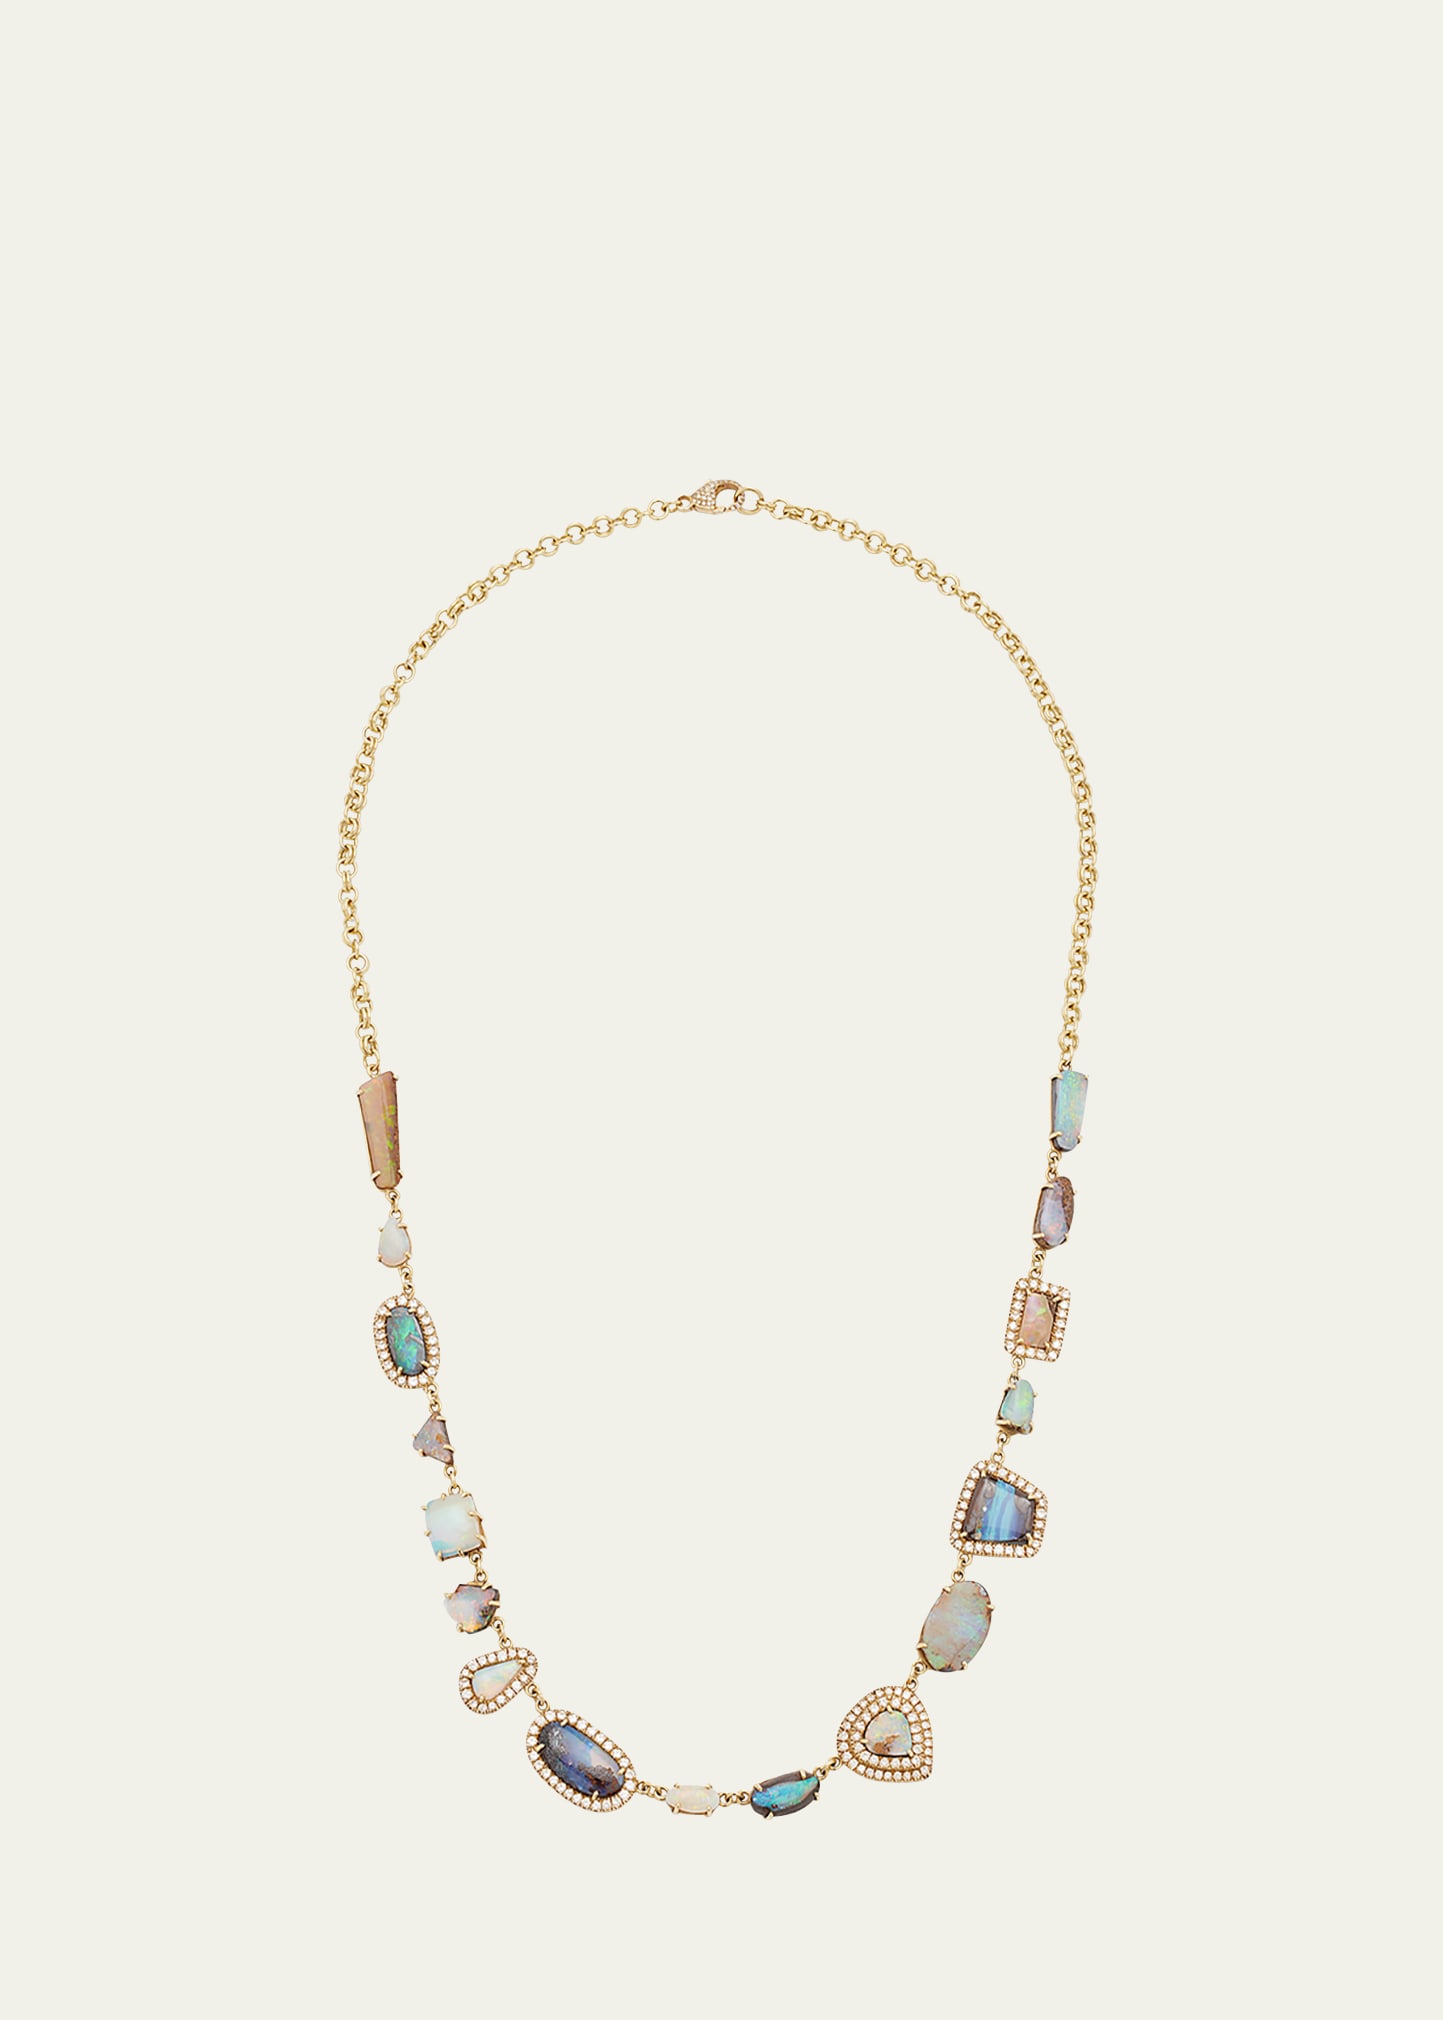 Kimberly McDonald 27.08 ct. Boulder Opals Necklace With 1.79 ct. Diamond, Double Diamond Bezels And Clasp In 18K Yellow Gold (21")